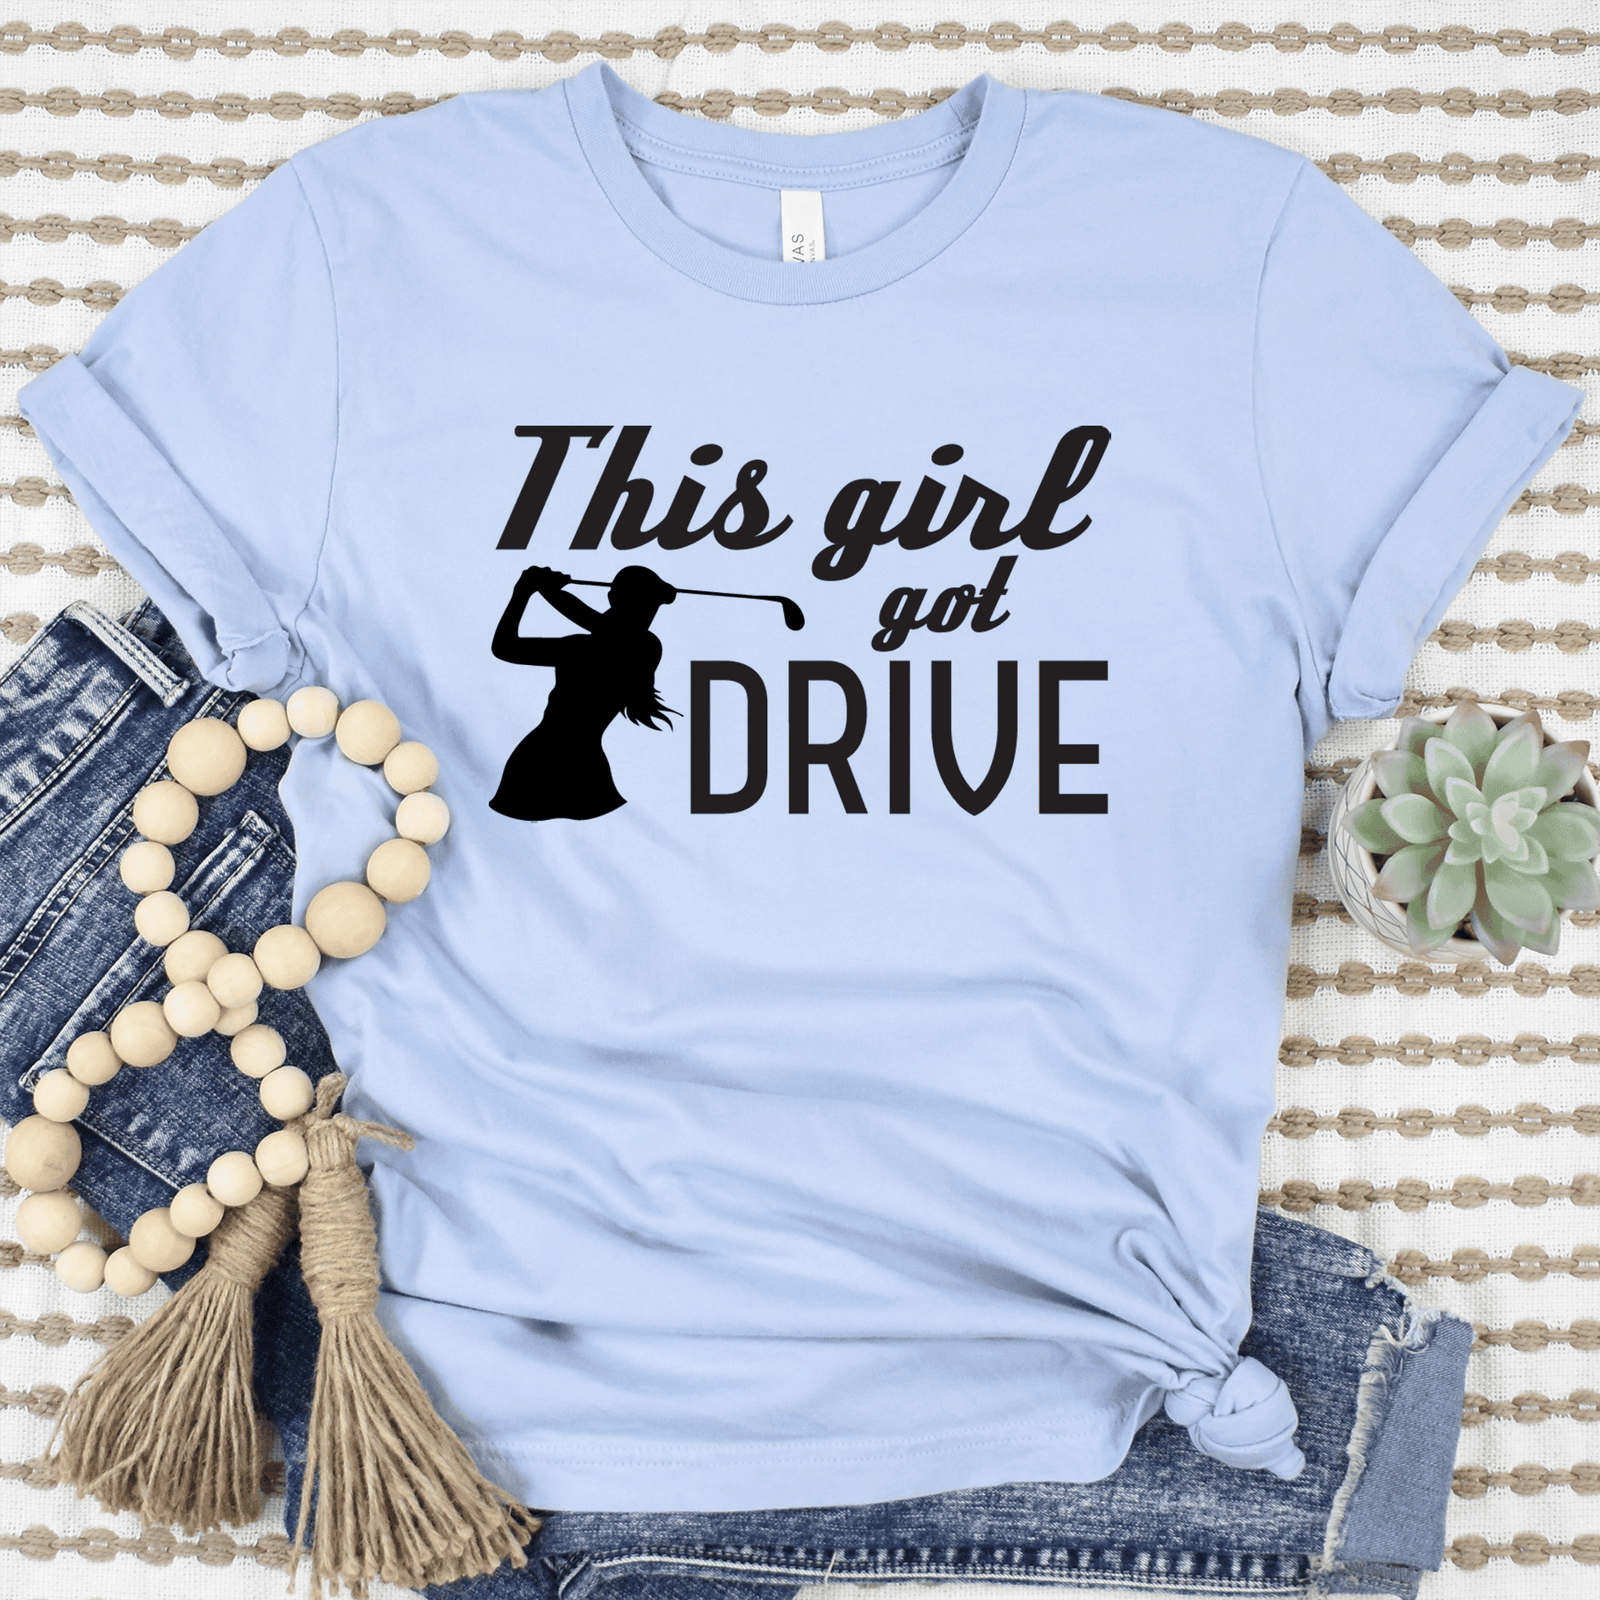 Womens Light Blue T Shirt with This-Girl-Can-Drive design